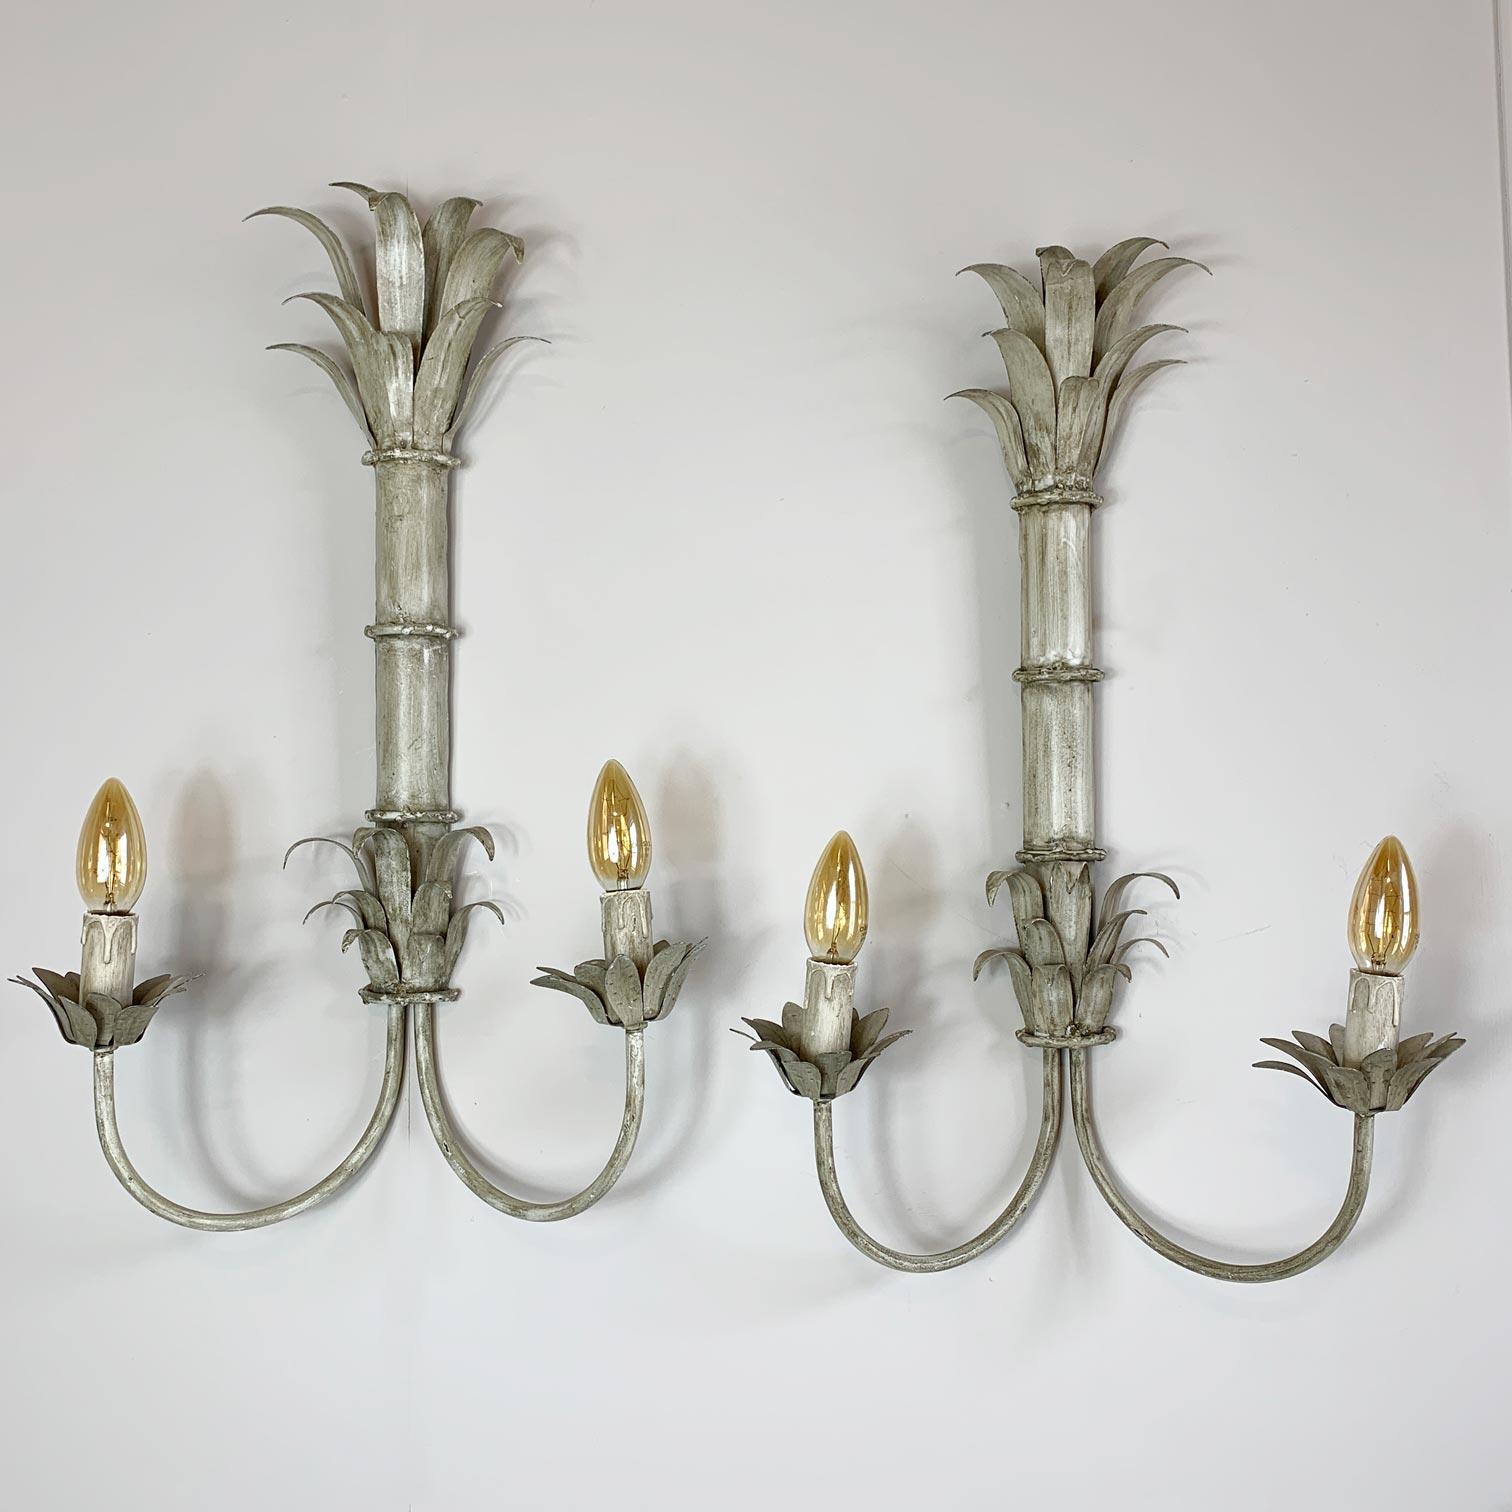 1970's Toleware Palm Reeds Wall Sconces 1